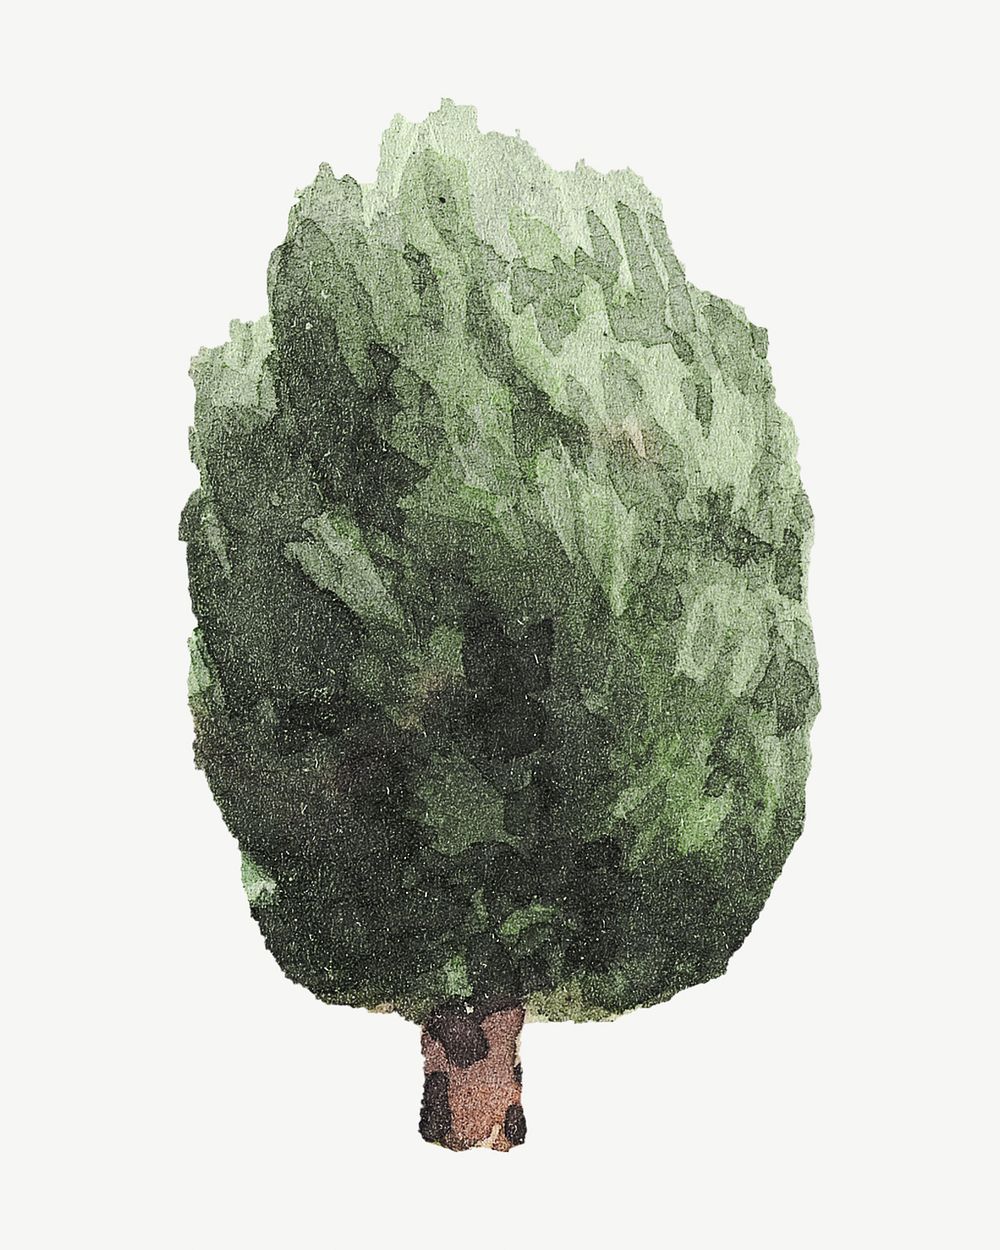 Watercolored tree illustration collage element psd. Remixed by rawpixel.